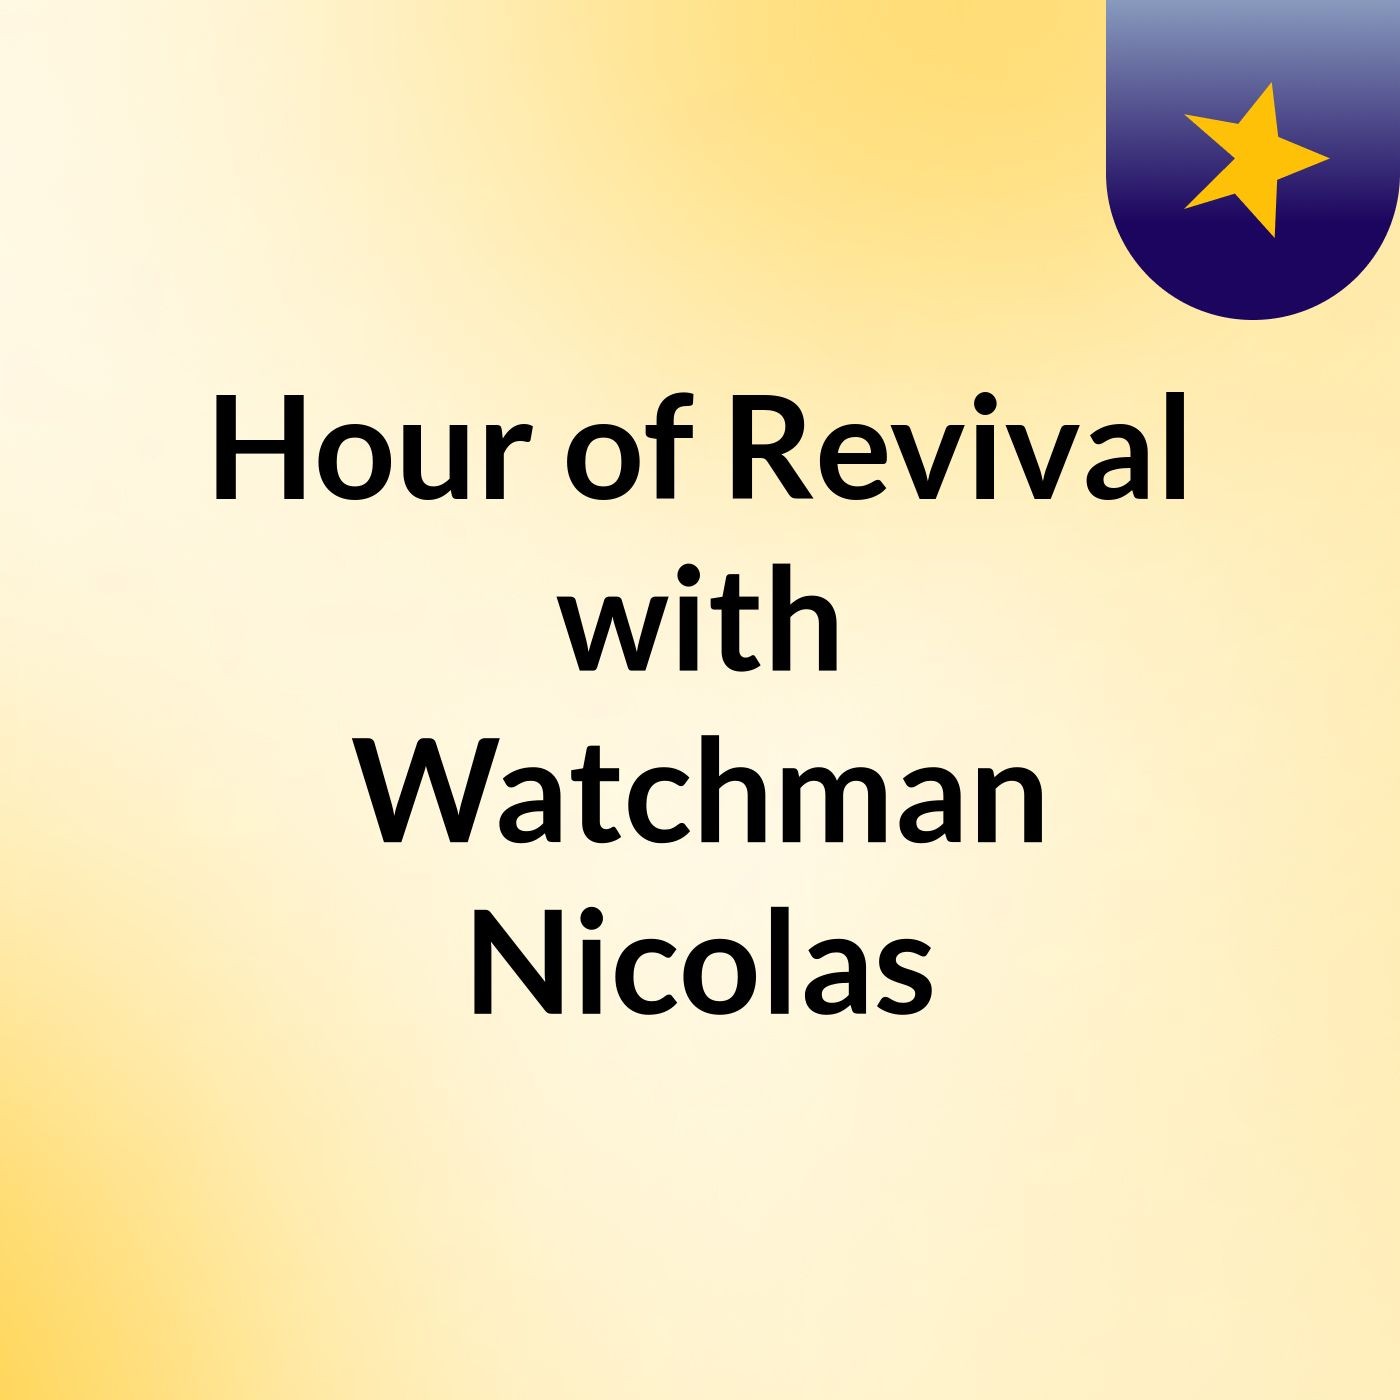 Hour of Revival with Watchman Nicolas